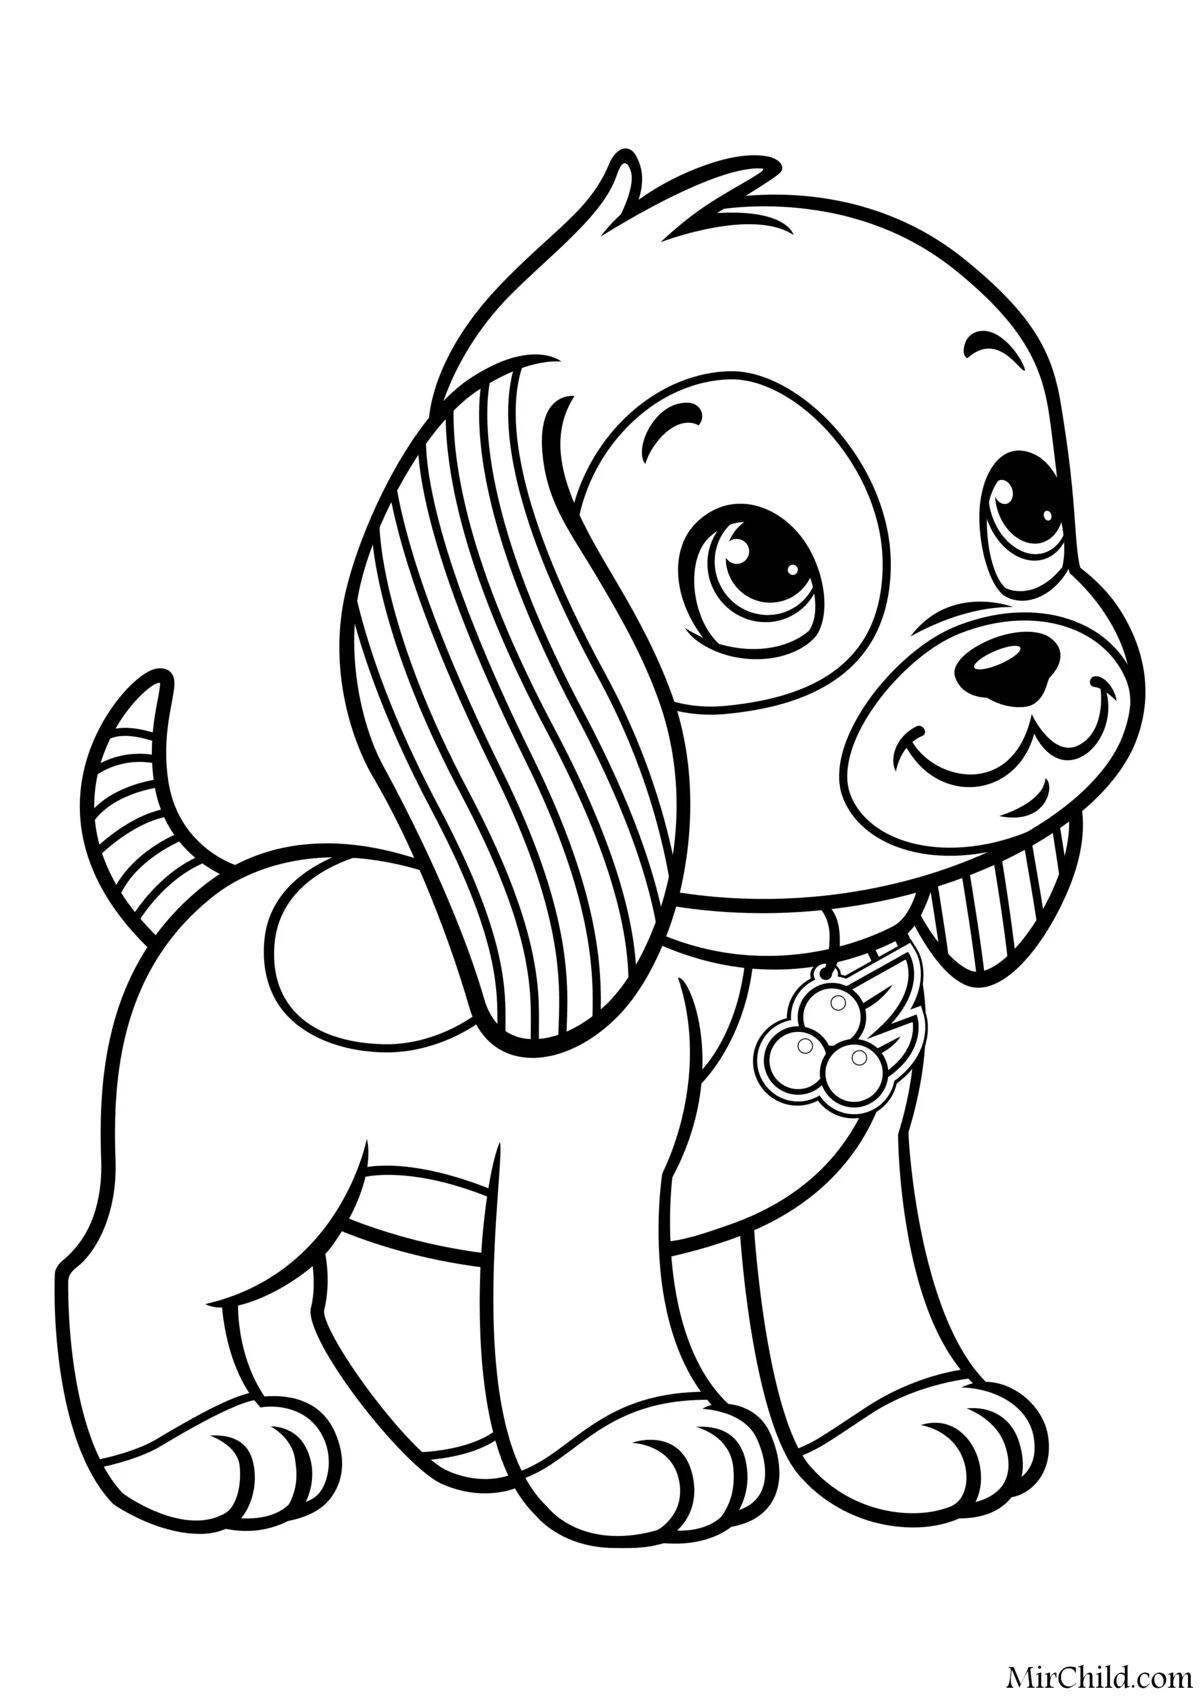 Awesome dog coloring pages for kids